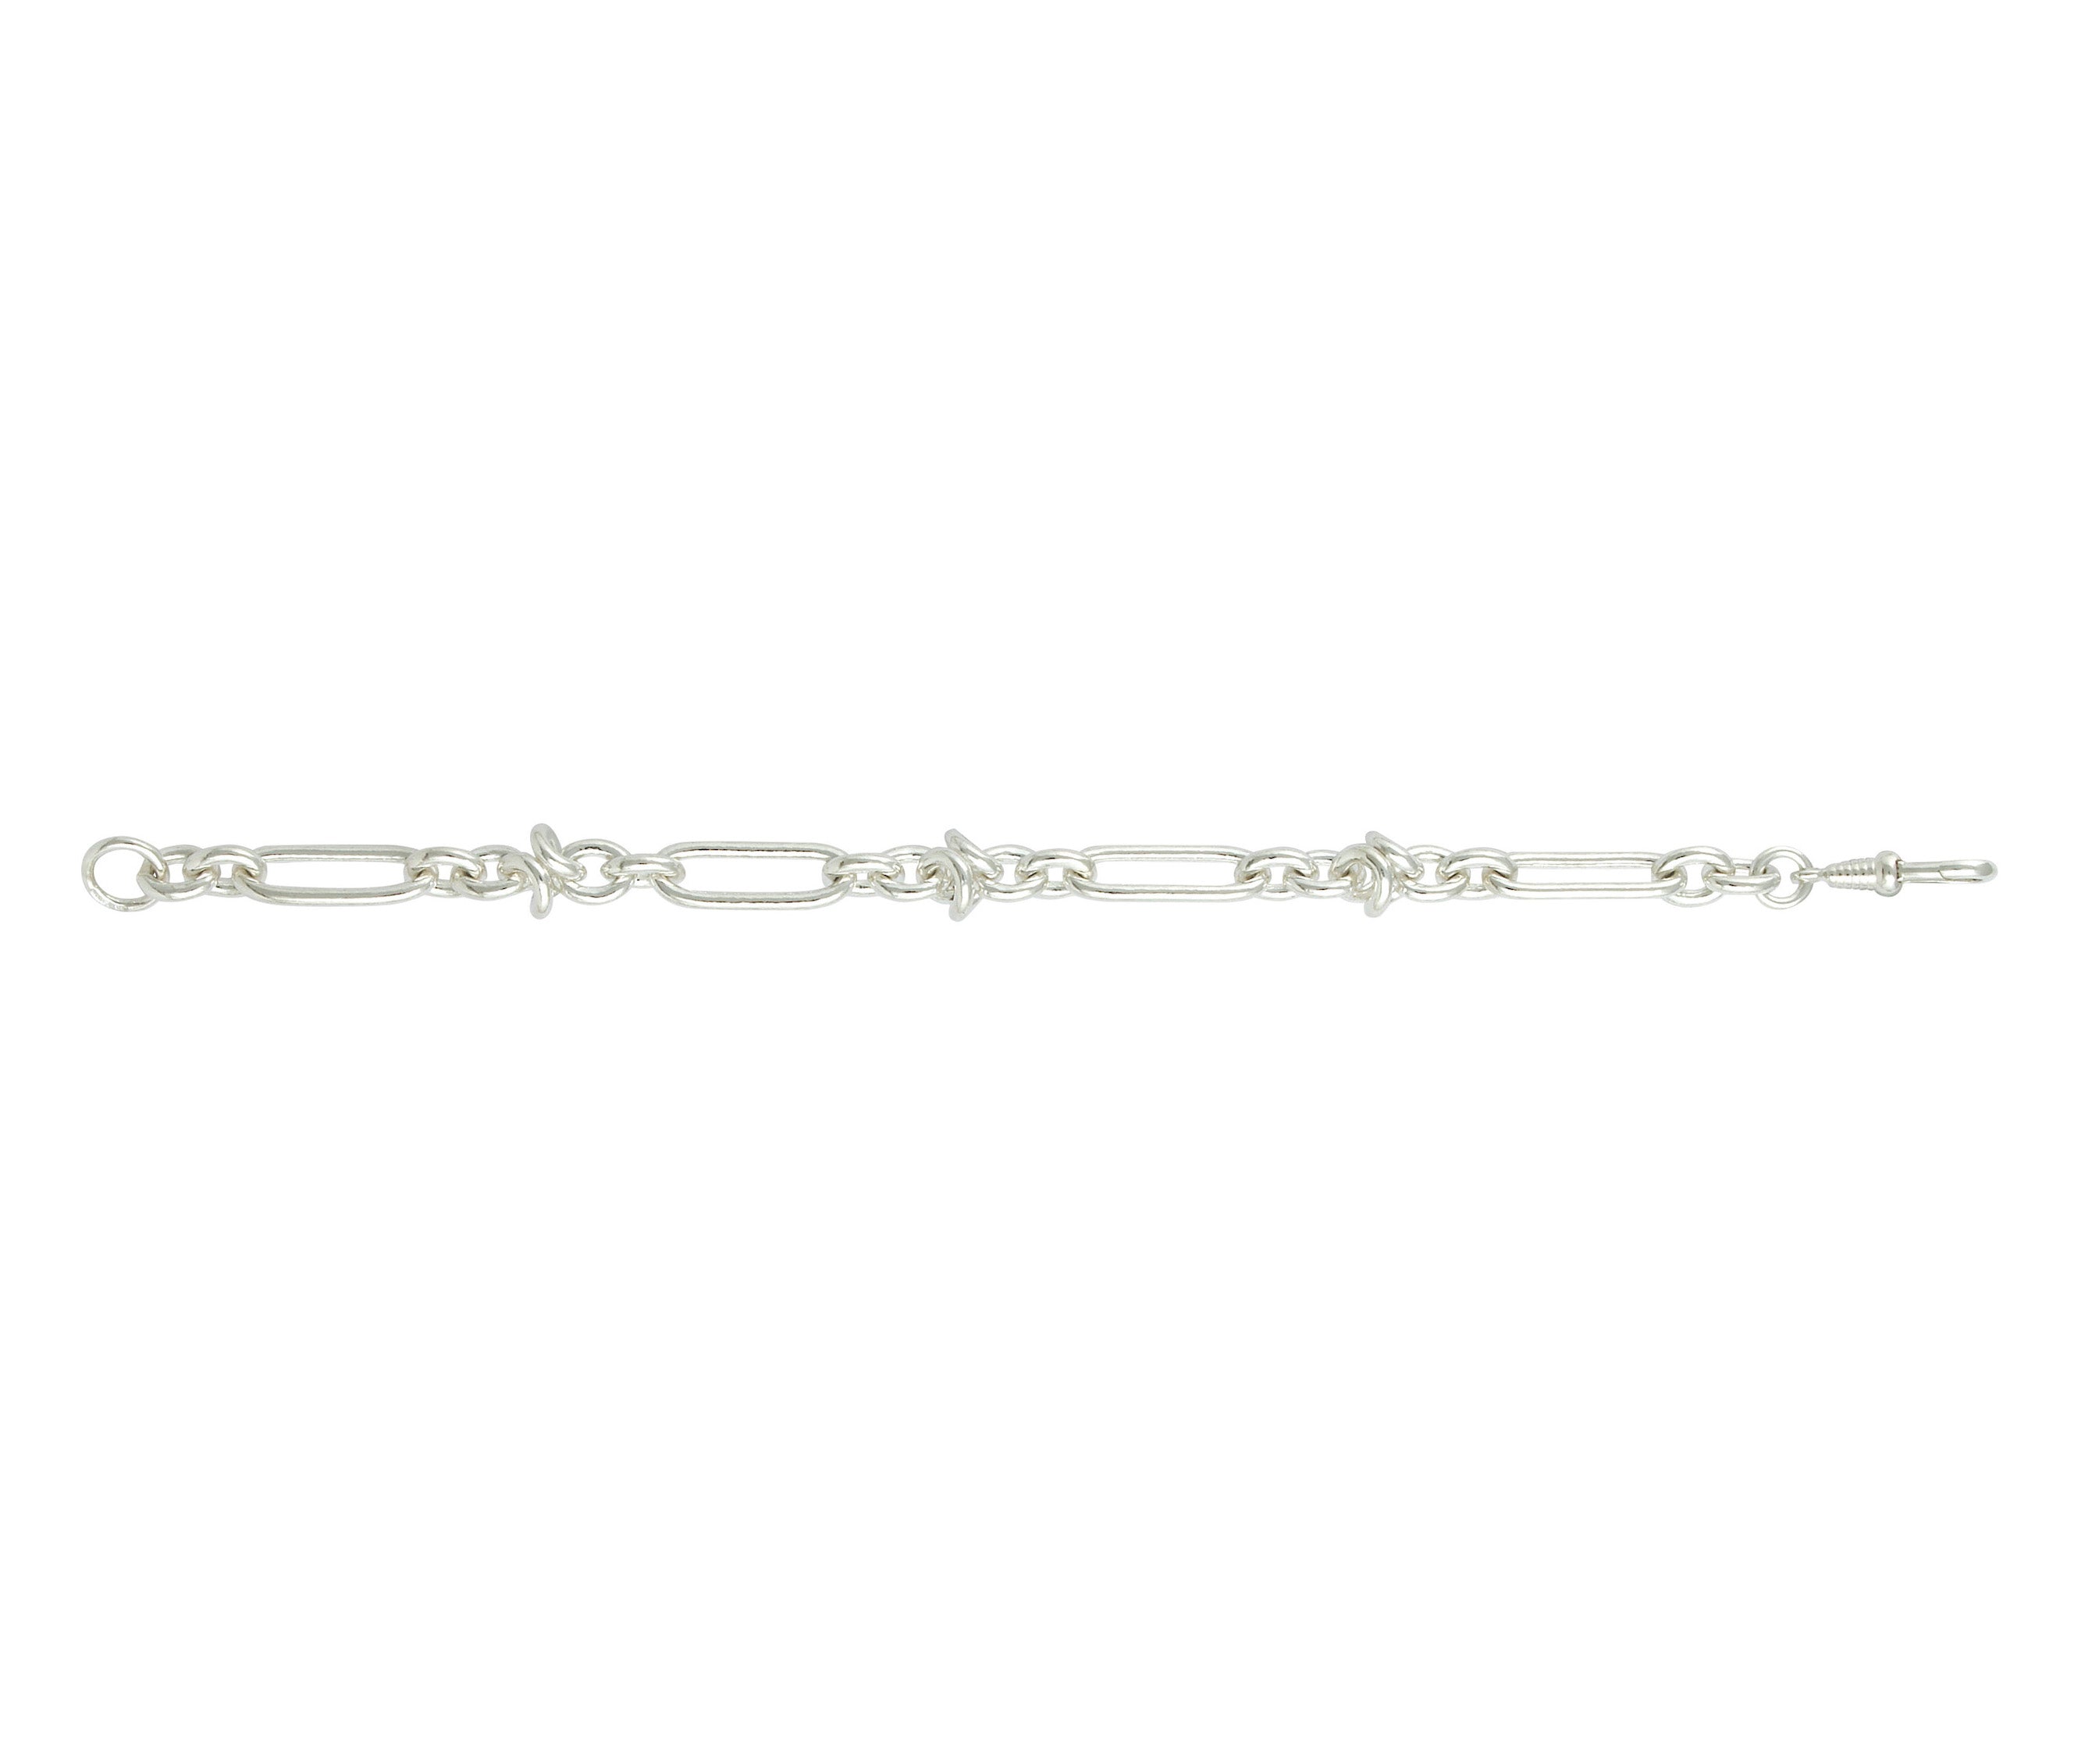 Silver Artemisia bracelet stretched out on a white background